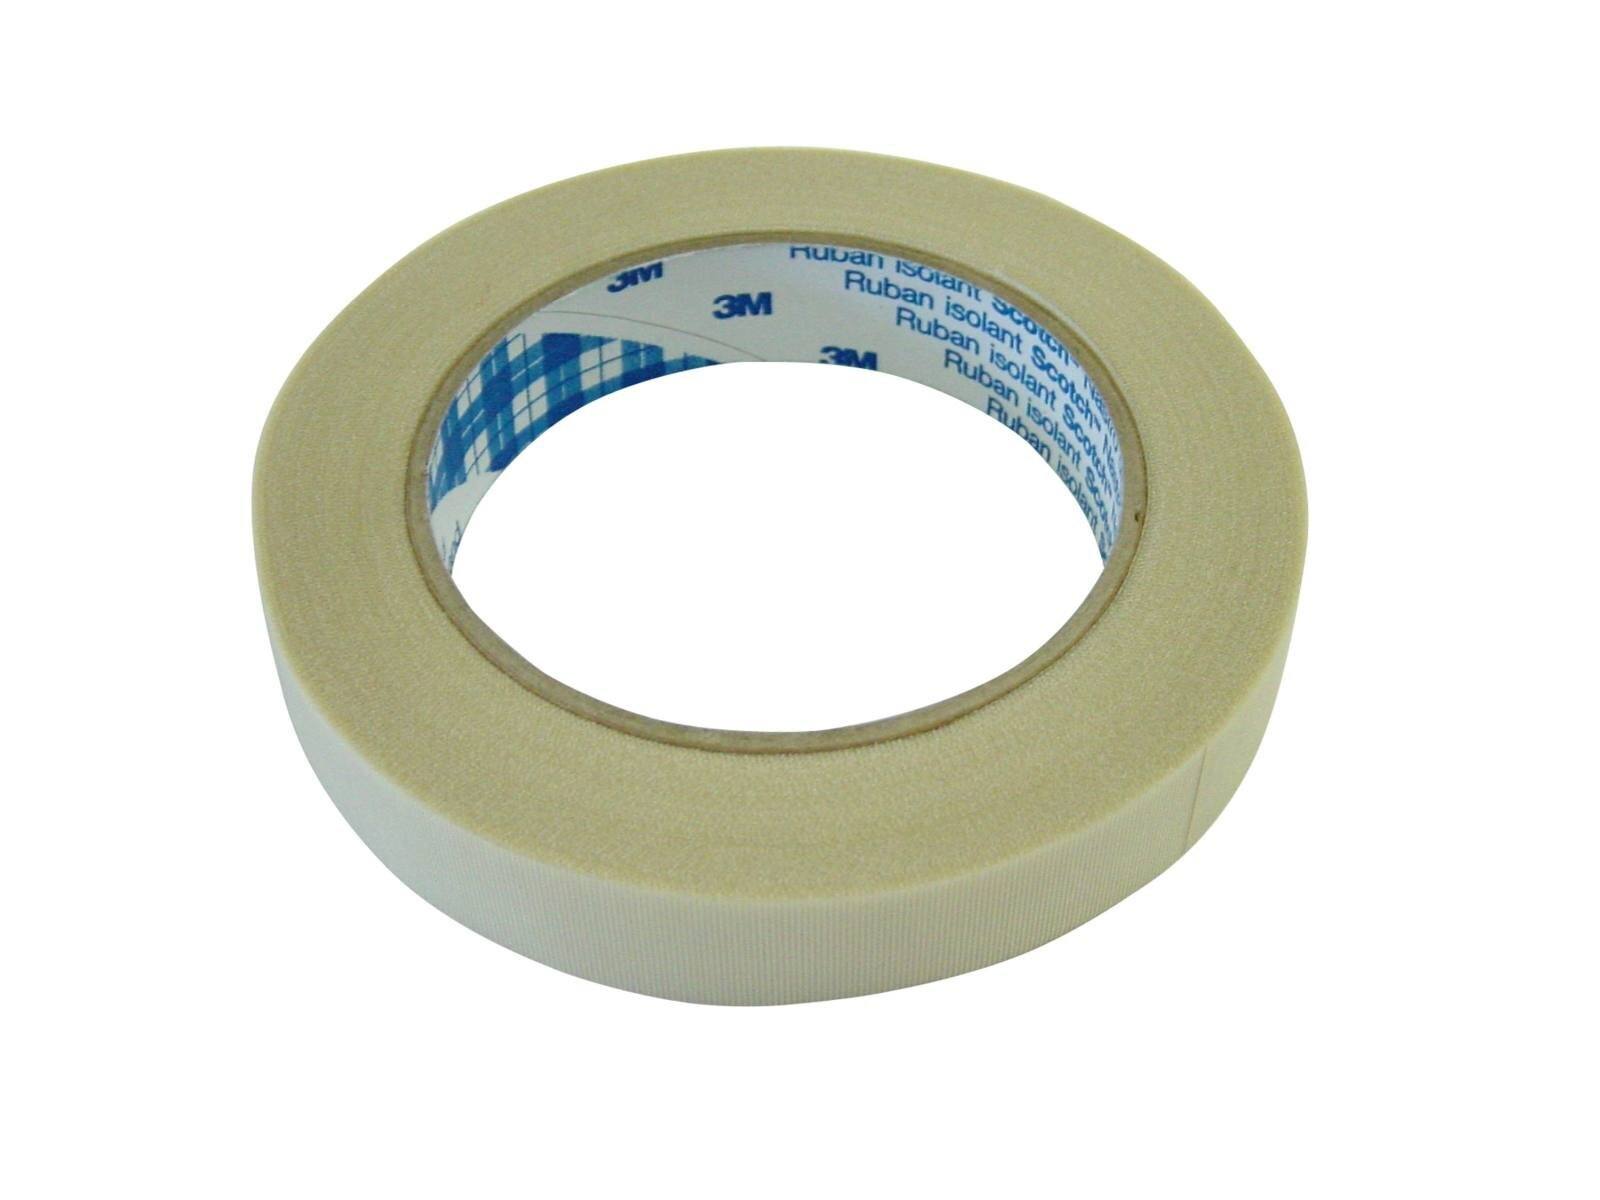 3M ET 69 Glasweefselband, wit, 50 mm x 33 m x 0,18 mm